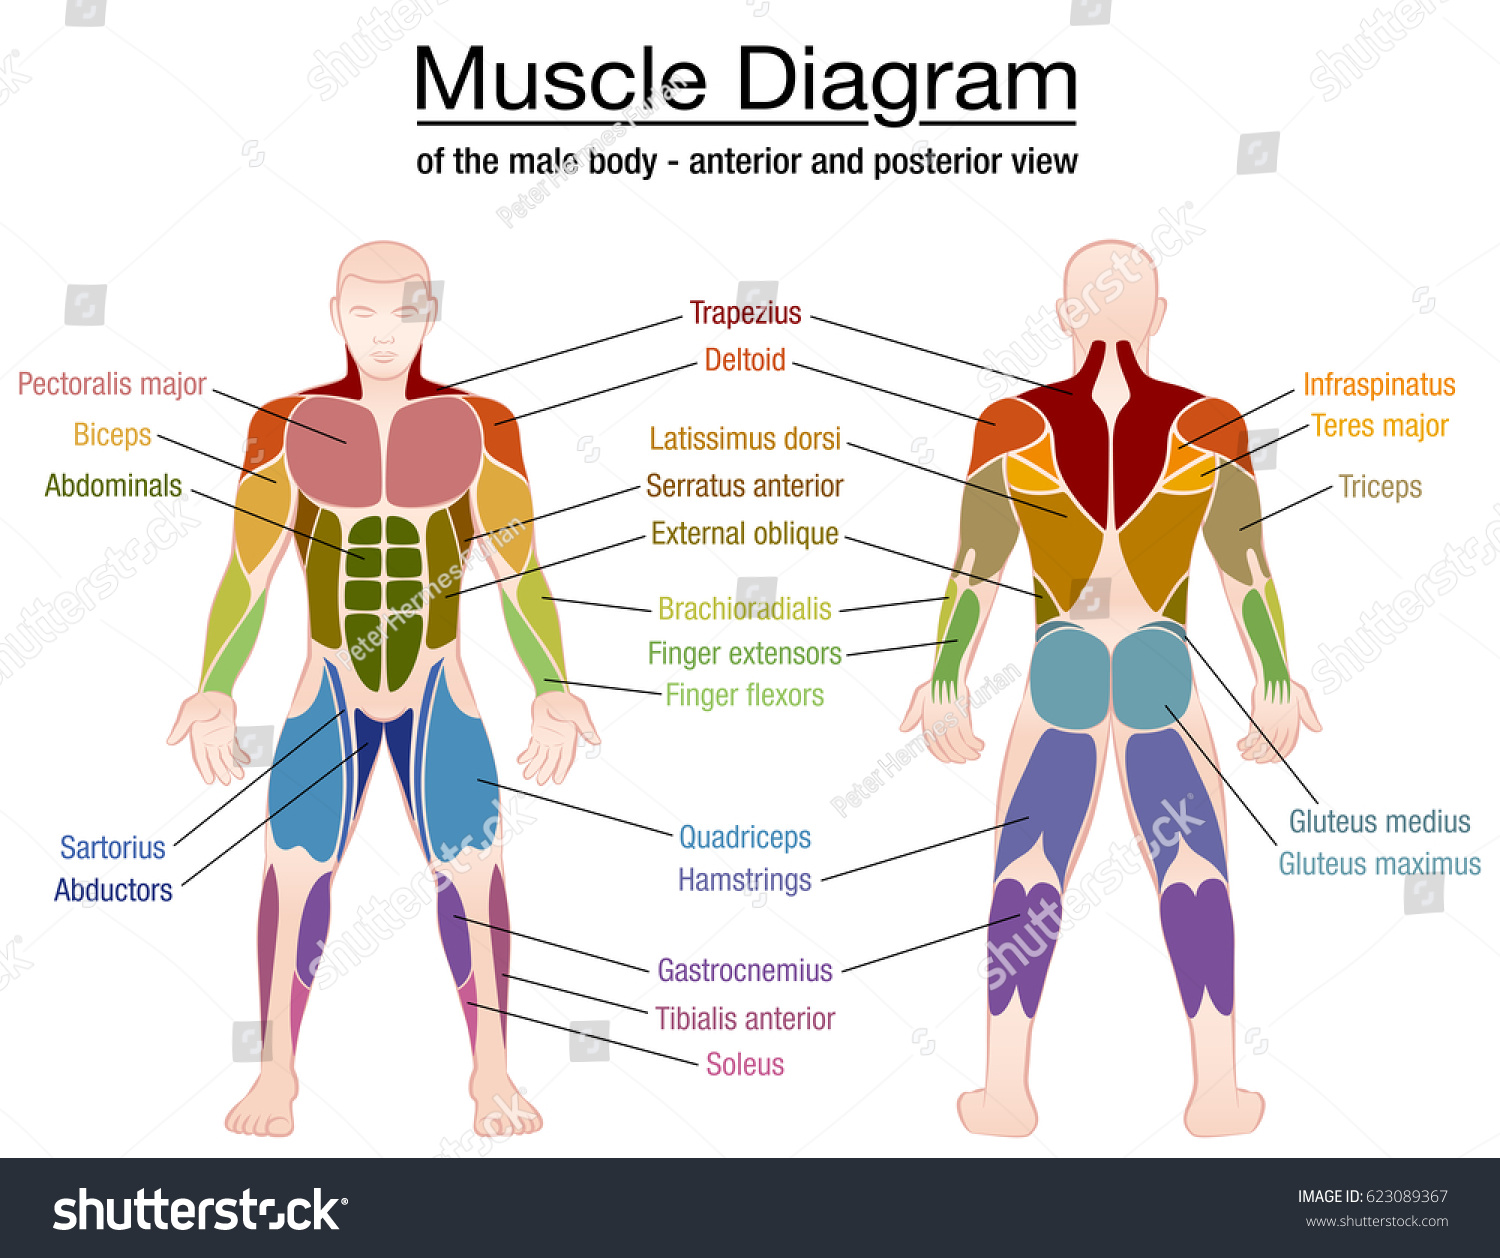 Muscle Diagram Most Important Muscles Athletic Stock Vector Royalty Free 623089367